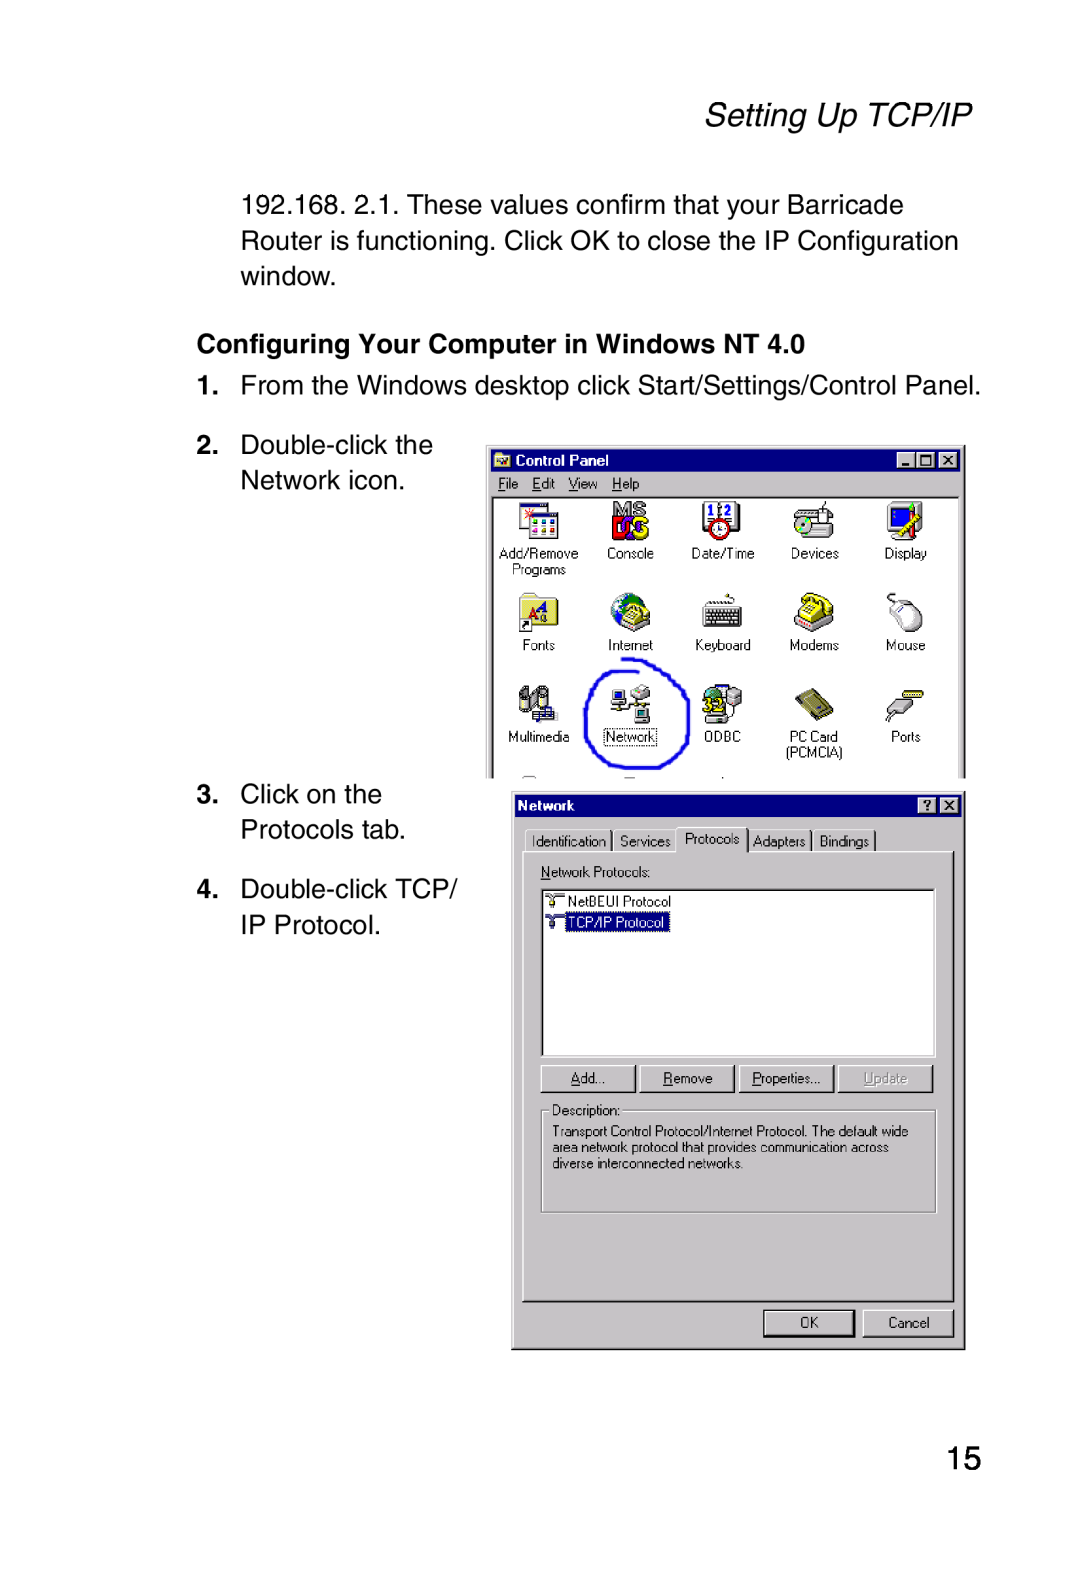 Sharp S M C 7 0 0 4 A B R manual Configuring Your Computer in Windows NT, Setting Up TCP/IP, Double-click TCP/ IP Protocol 